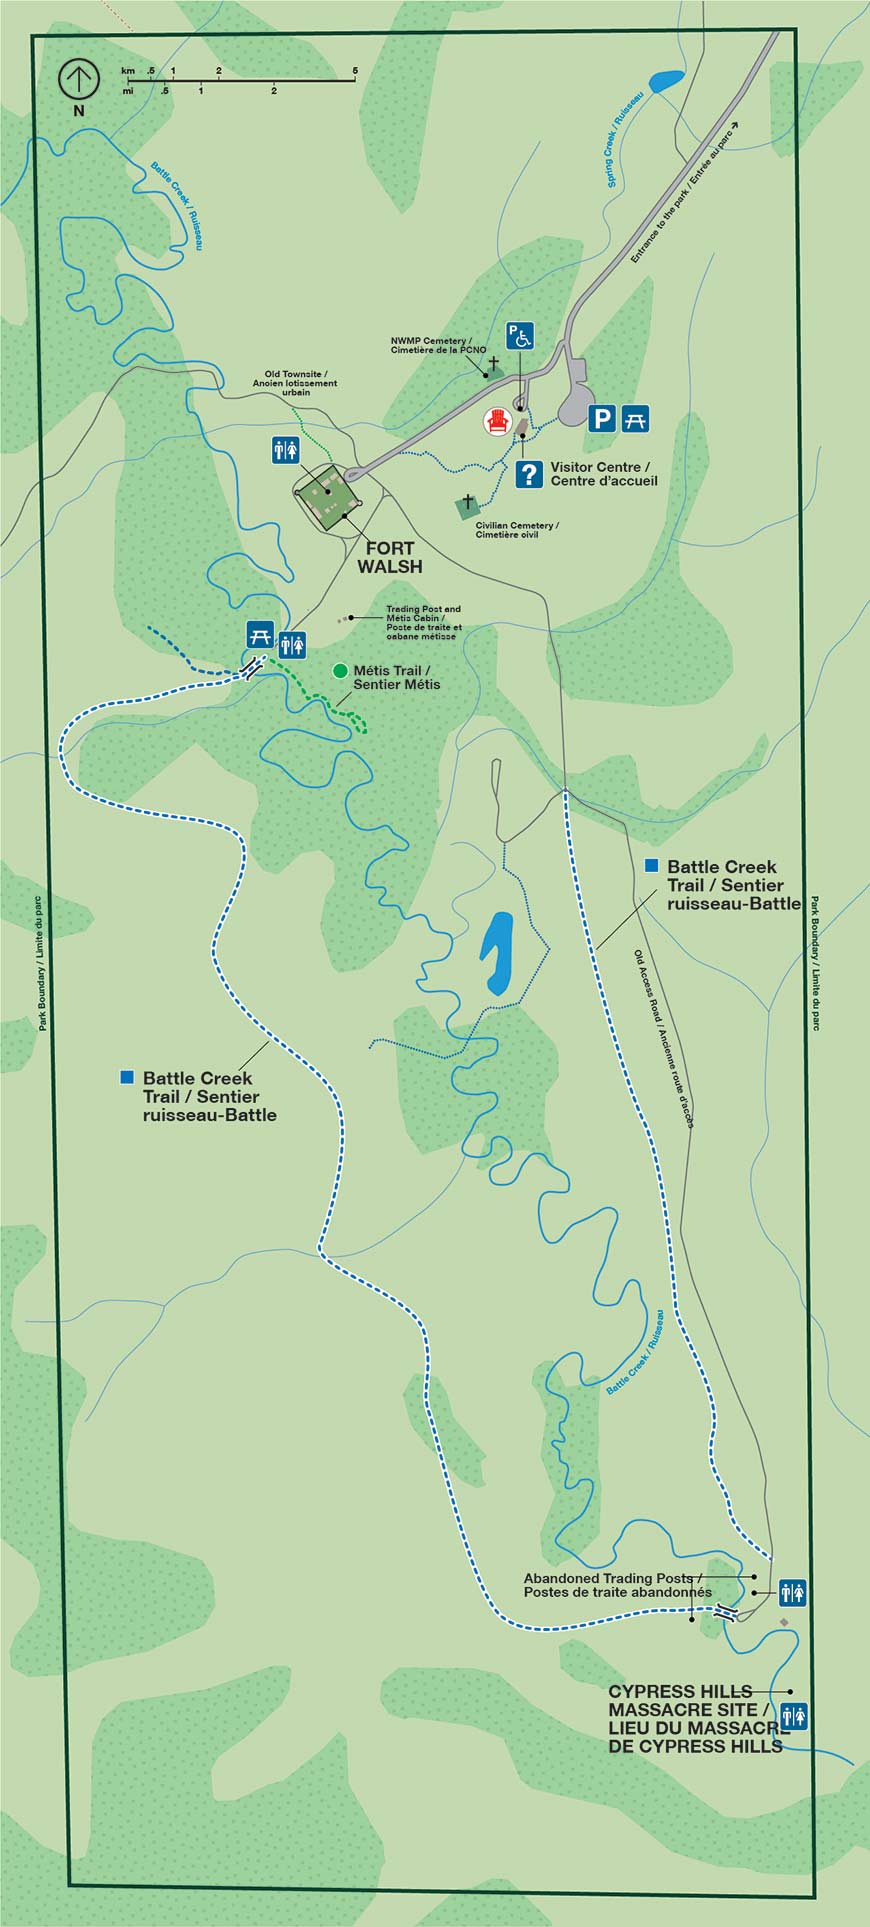 Fort Walsh trails map